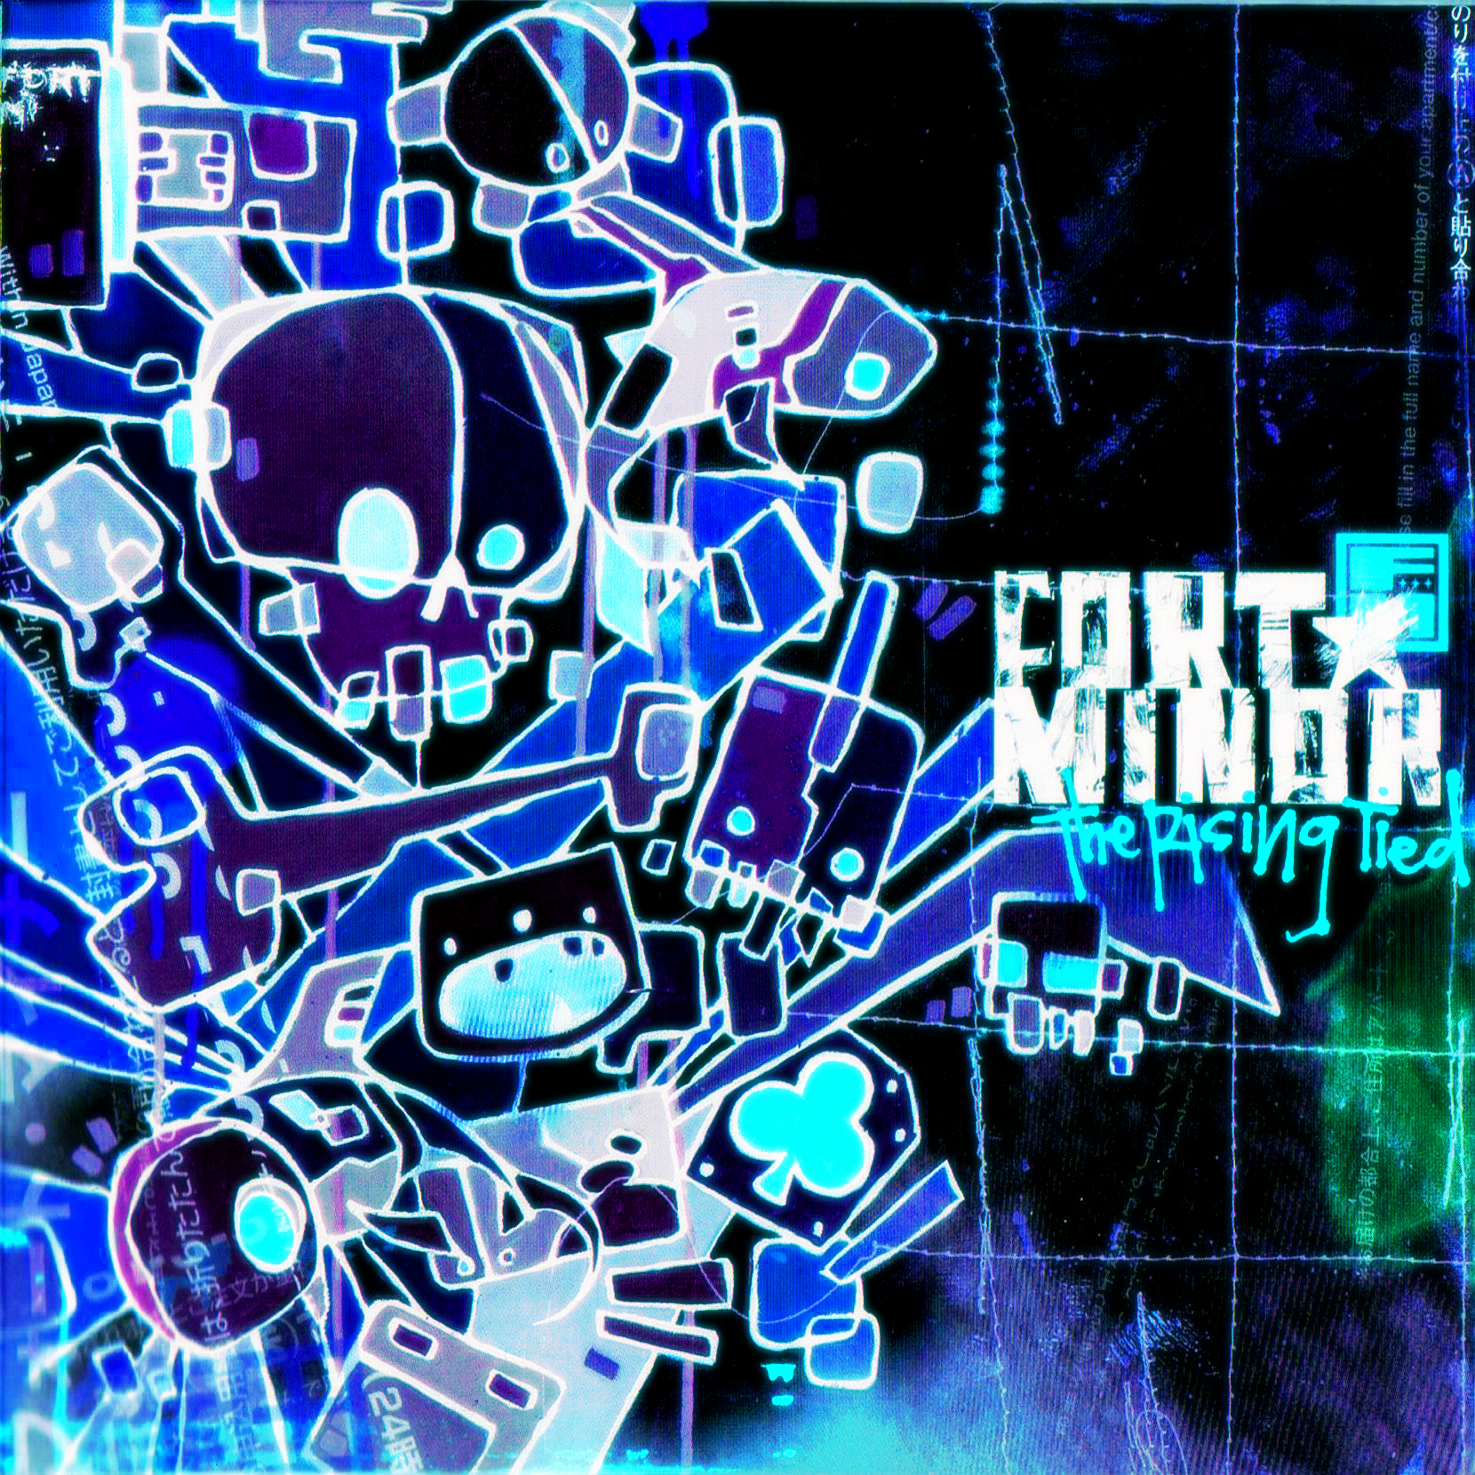 Fort Minor The Rising Tied Cover Edit By